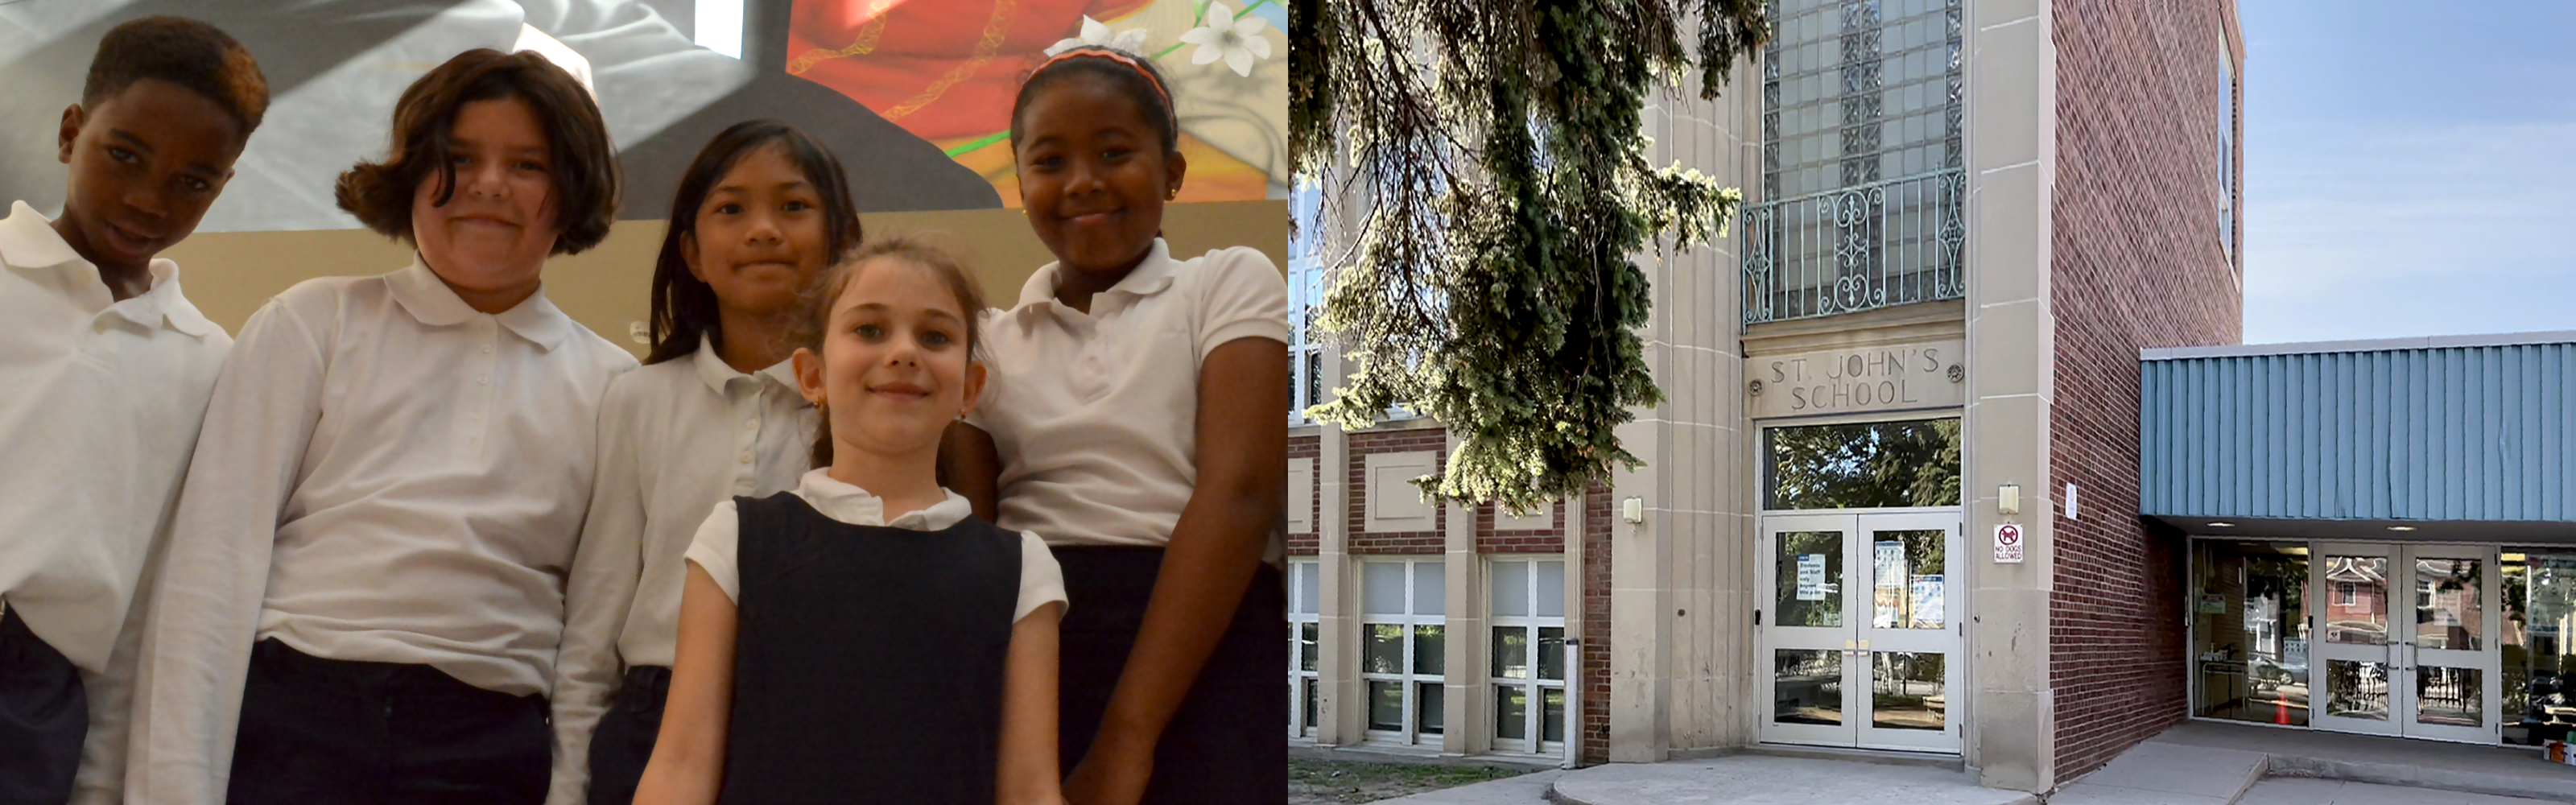 Left, a group of elementary students in white and navy school uniform. Right, the front of the St. John Catholic School building.